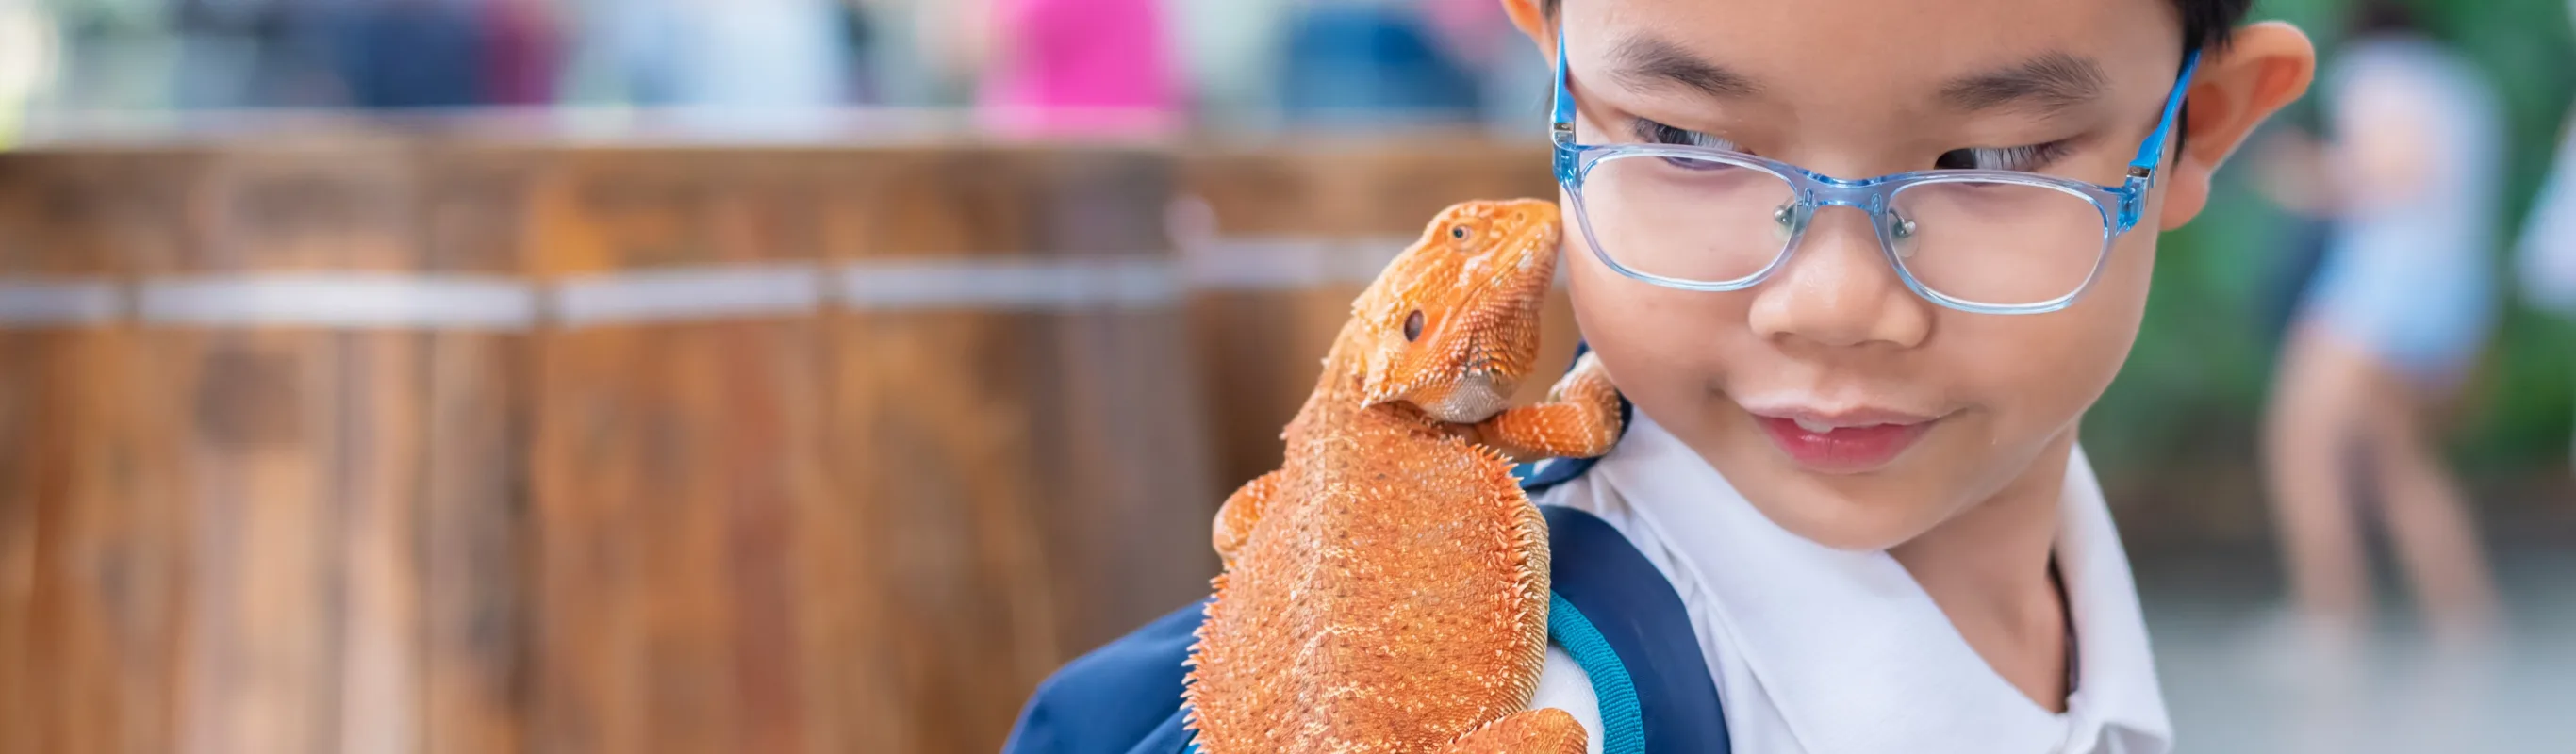 Child with an orange lizard on his shoulder